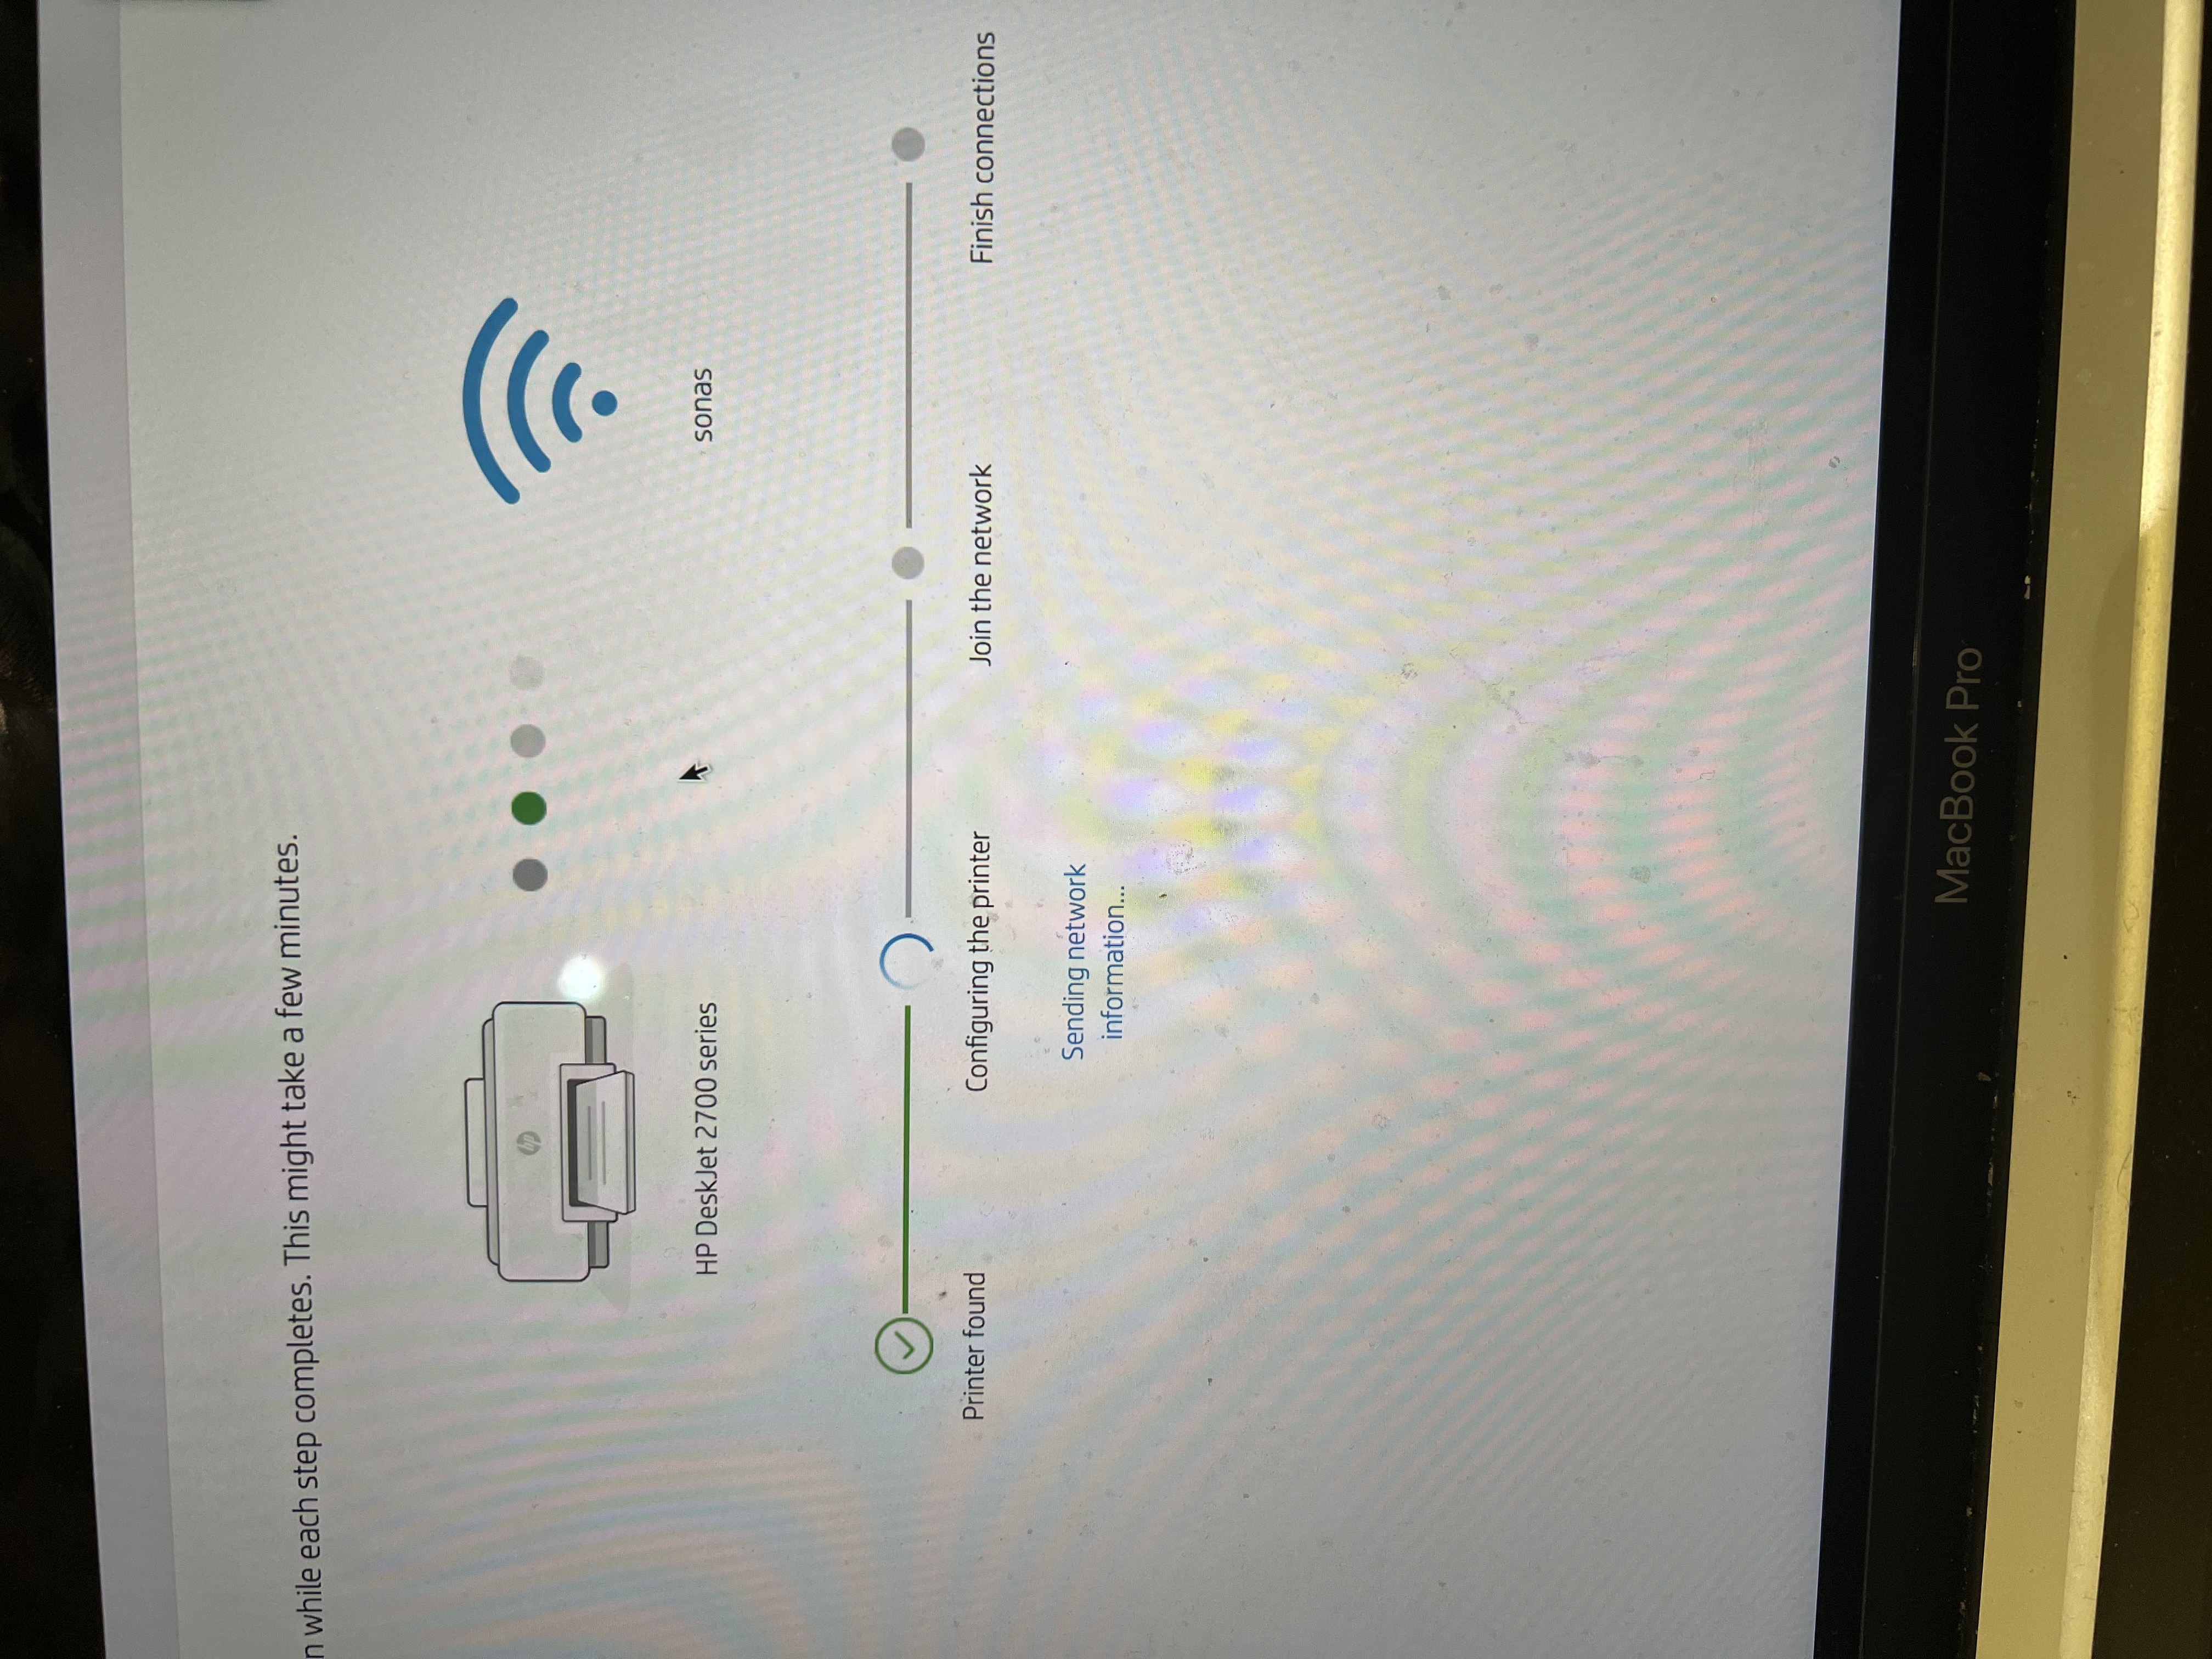 DeskJet 2700 Won't connect to wifi - HP Support Community - 8280517